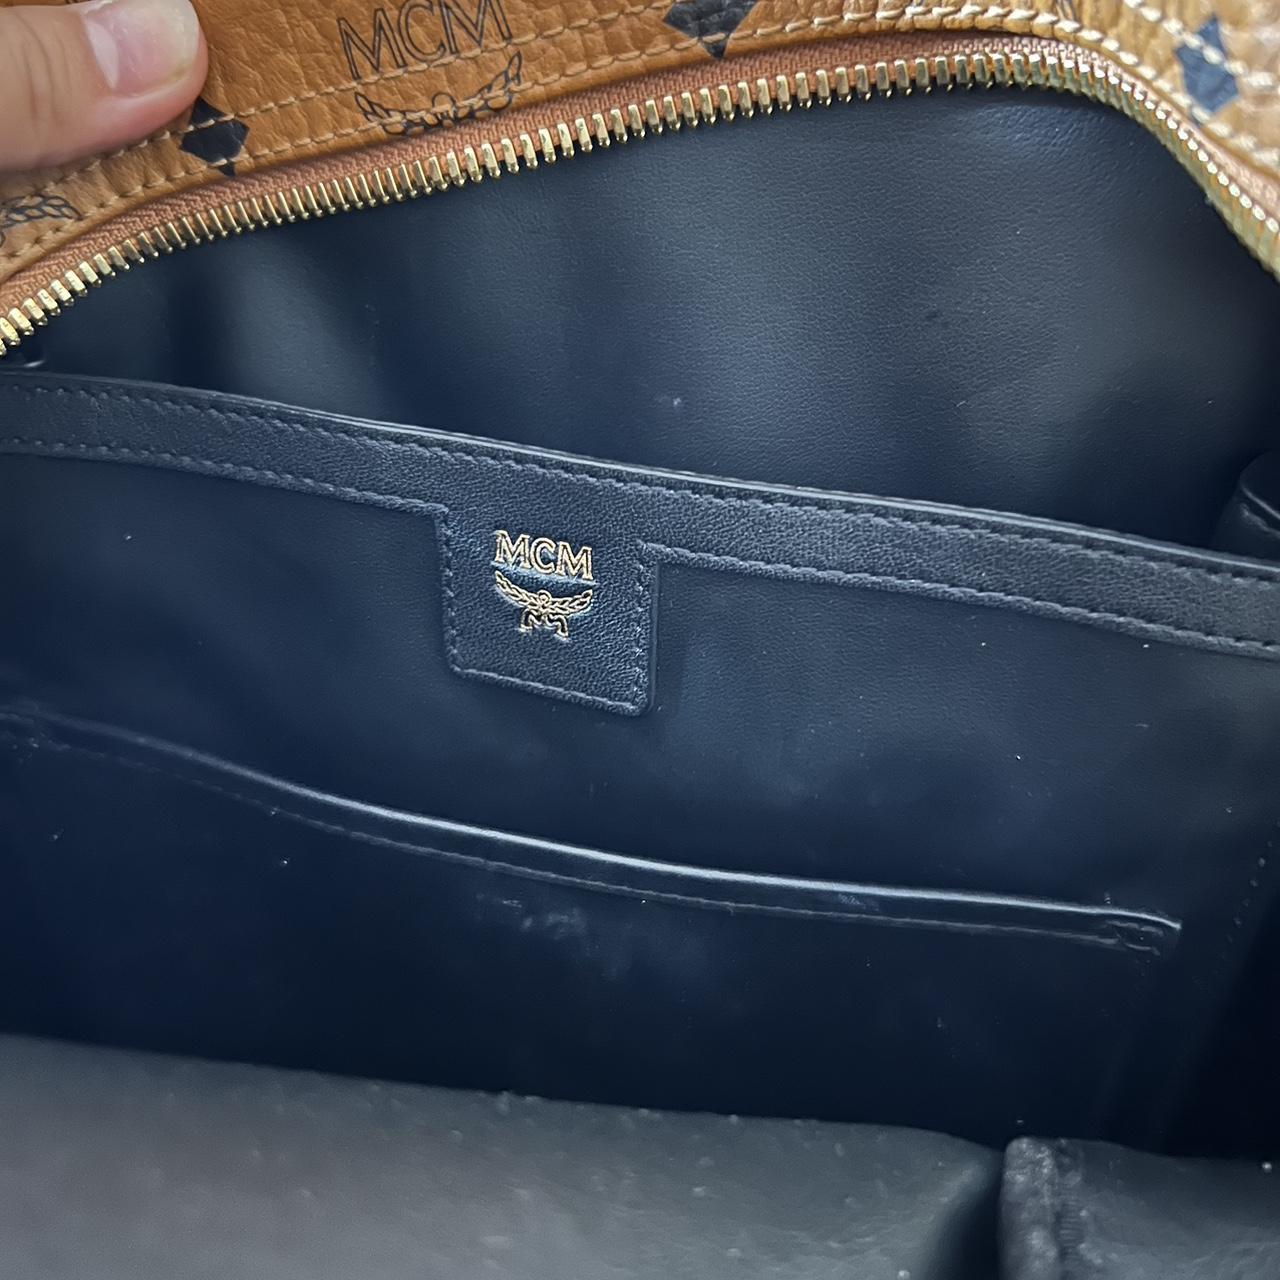 mcm bag barely used, perfect condition comes with - Depop